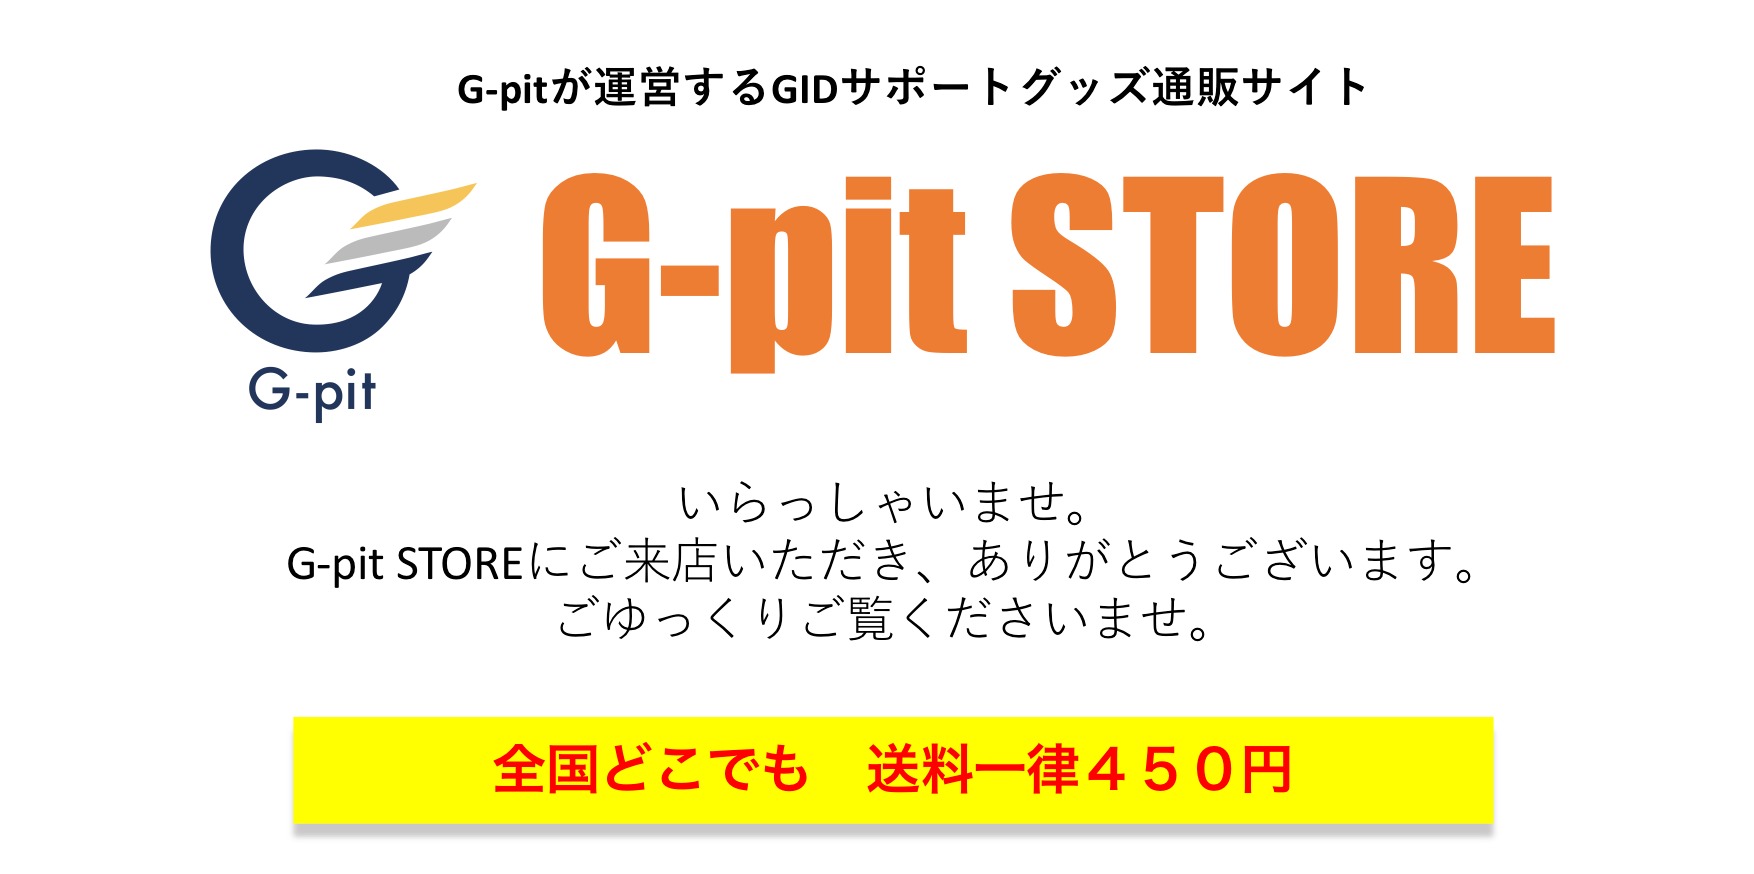 G-pit Store